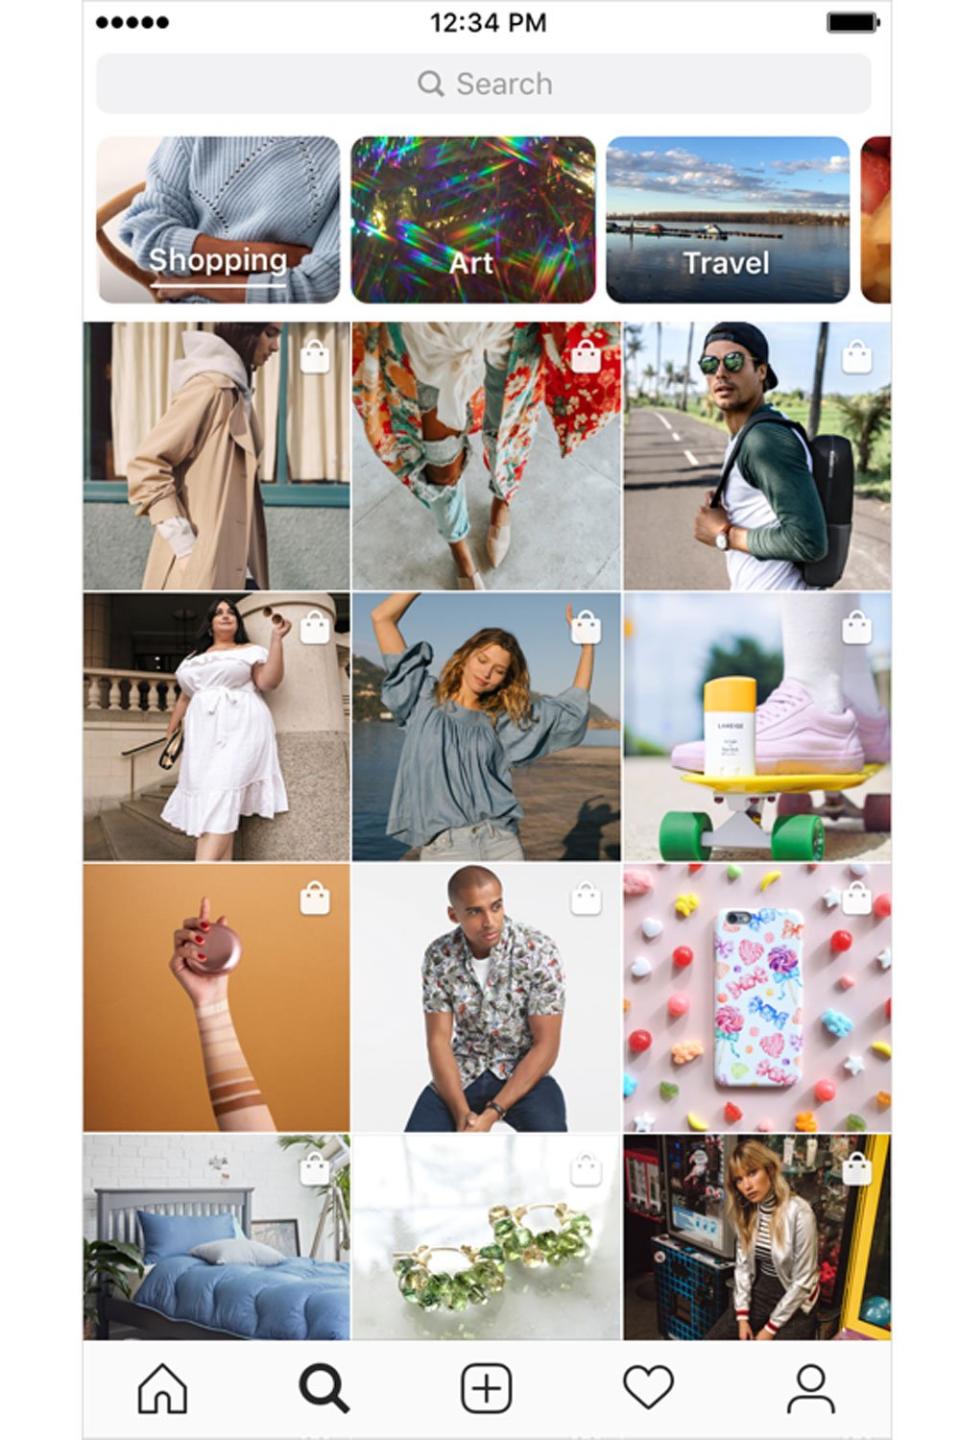 One way Instagram wants to get more people shopping on the platform is through Explore (Instagram)